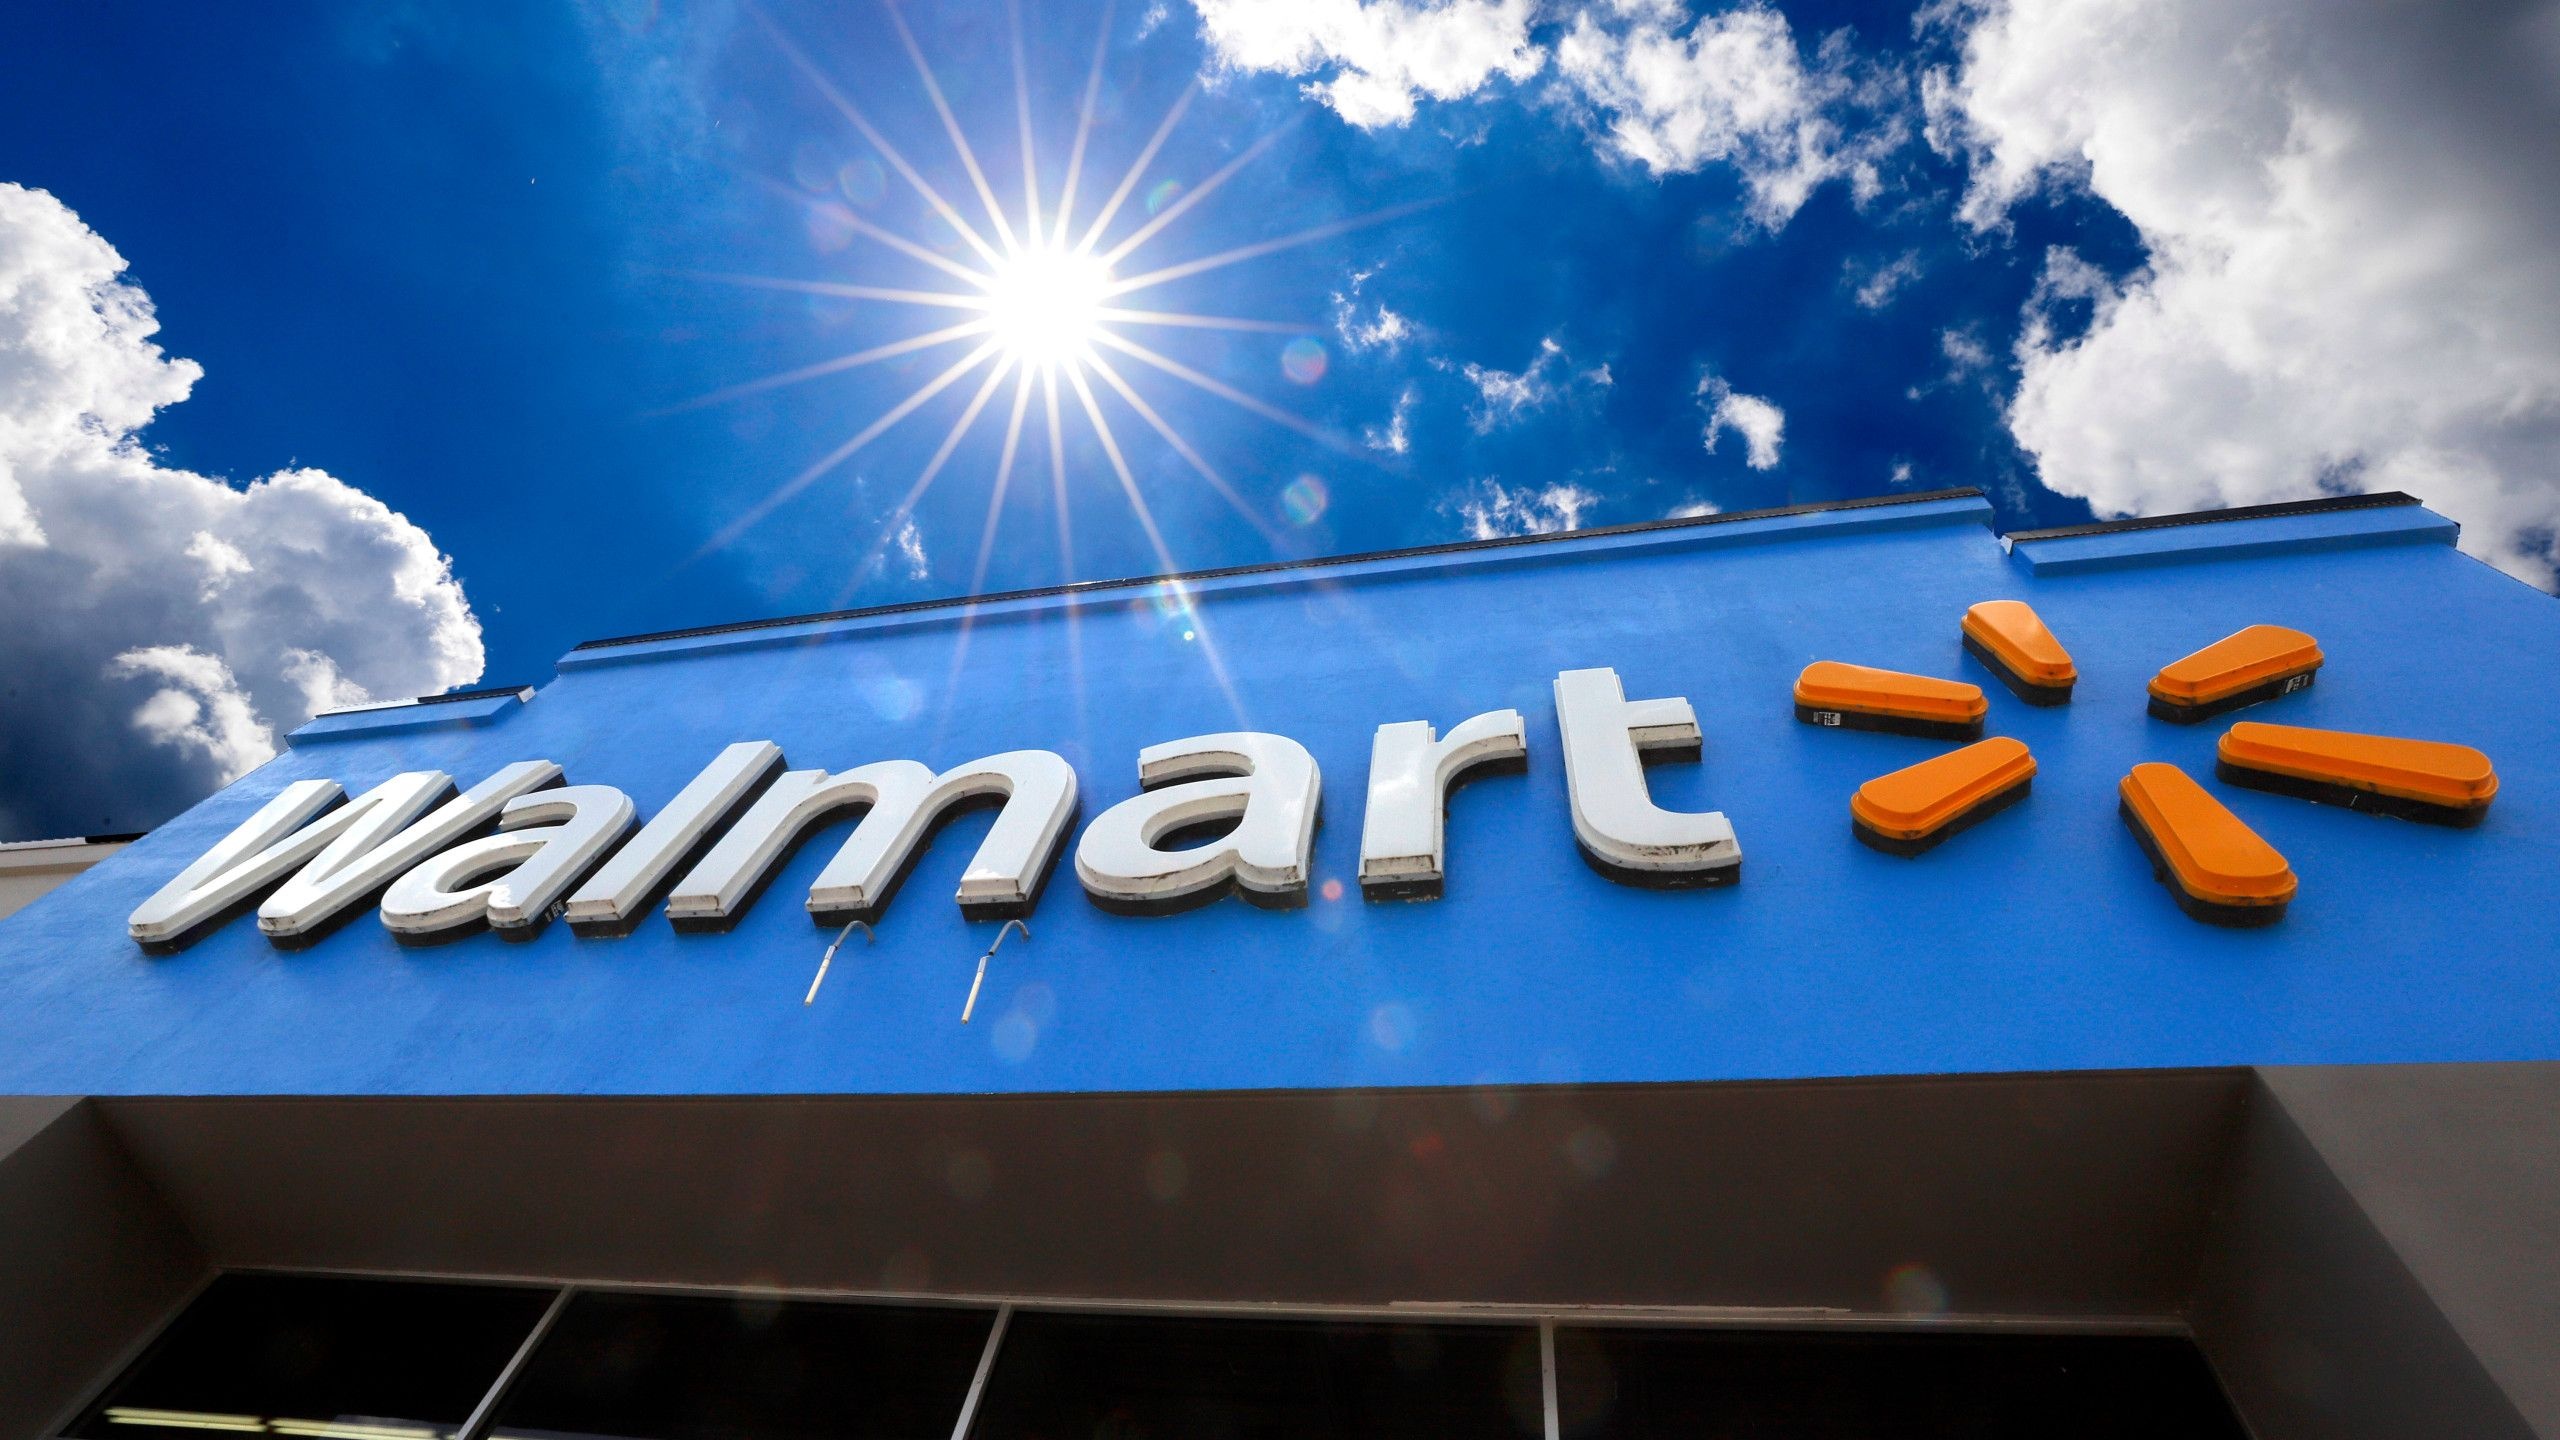 Walmart: The world’s largest private employer, with more than 2.3 million workers globally. 2560x1440 HD Wallpaper.